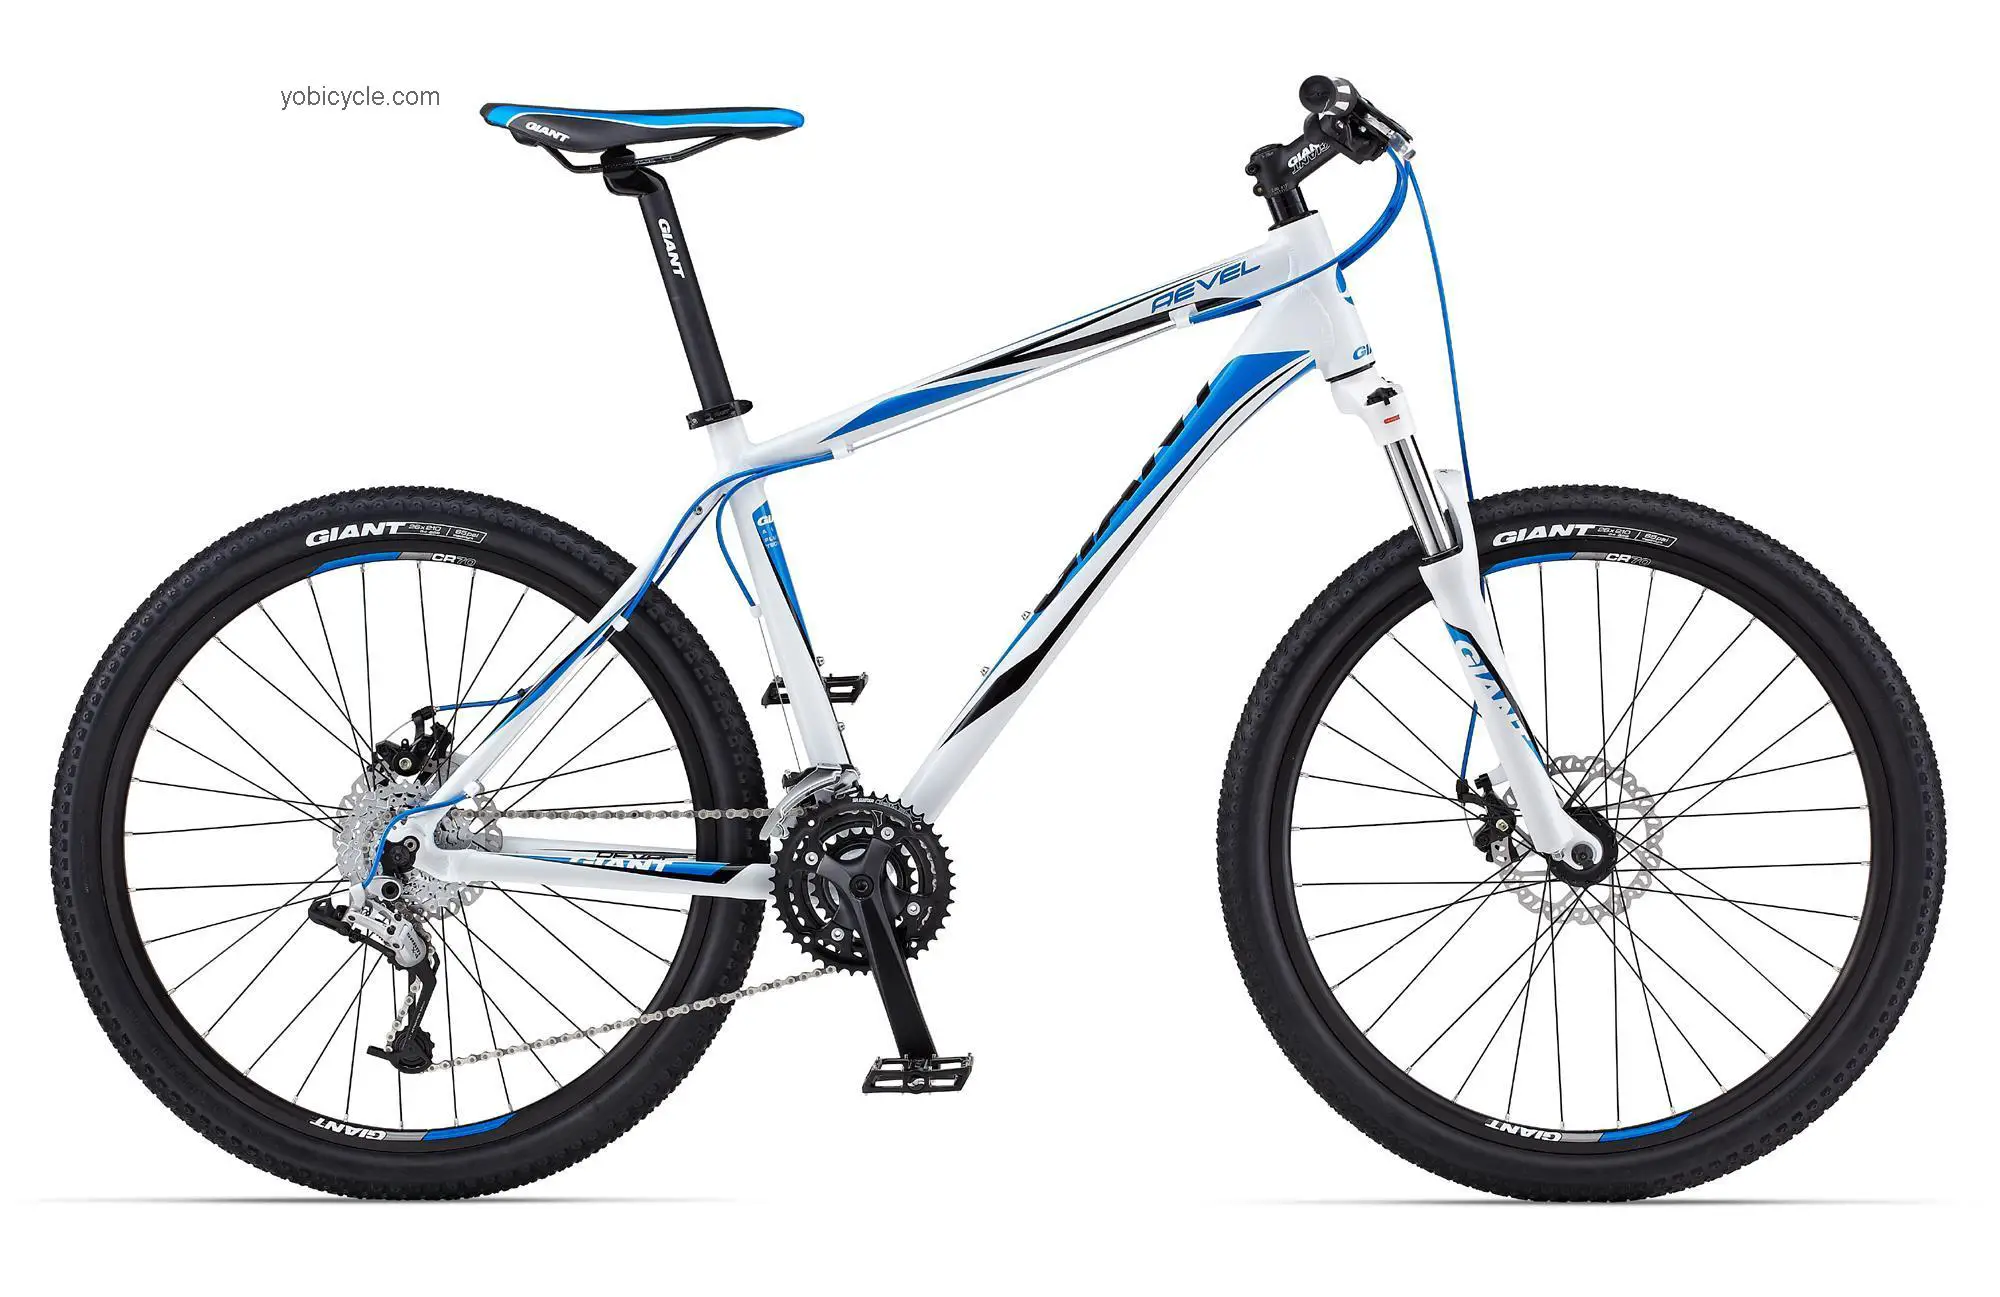 Giant Revel 1 2013 comparison online with competitors